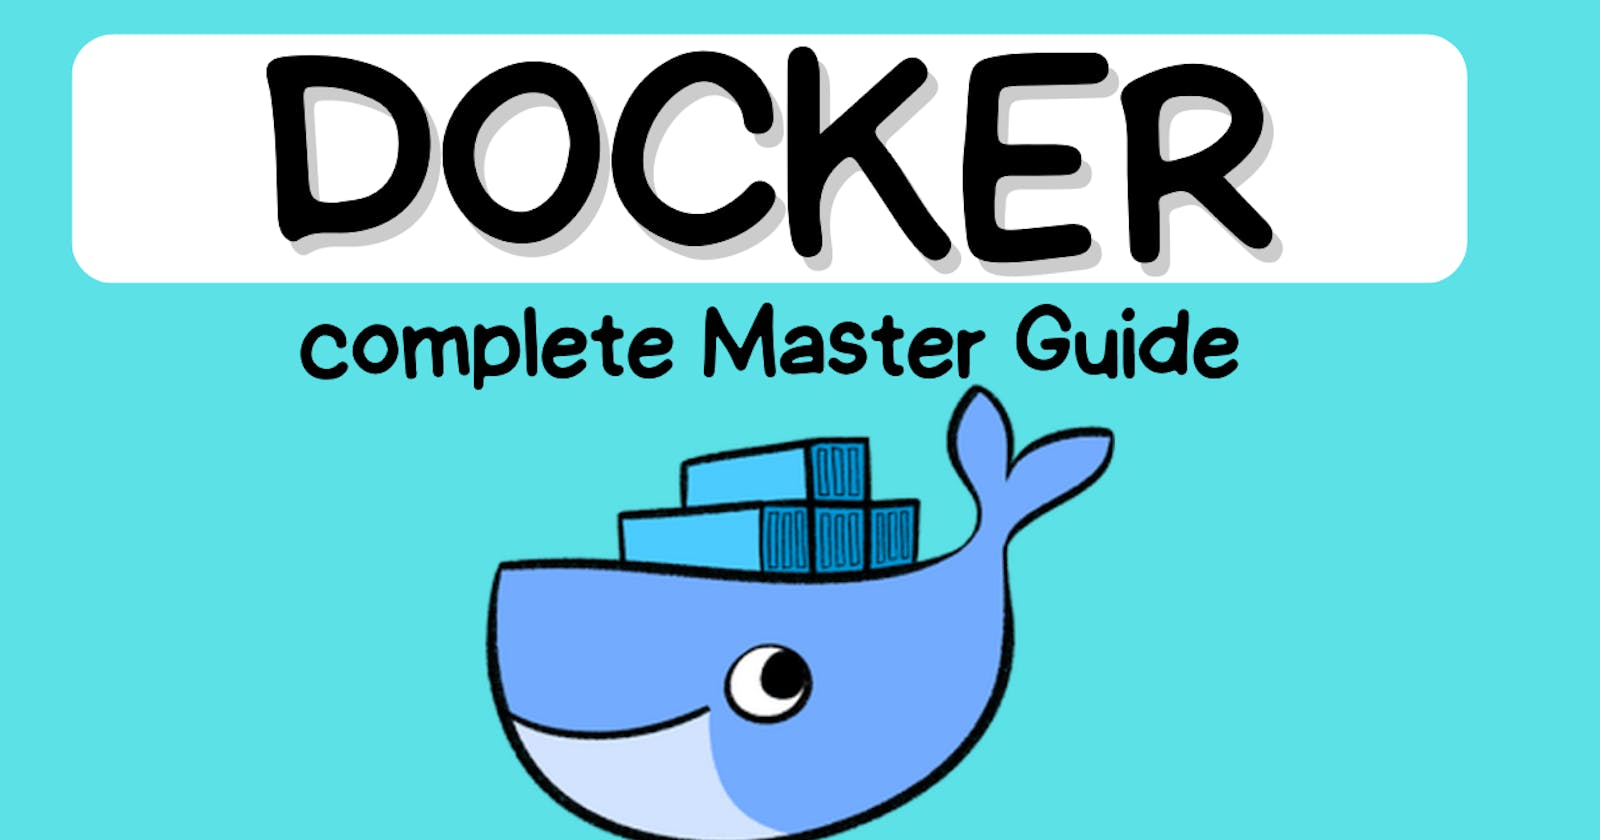 All About Docker and Containers!